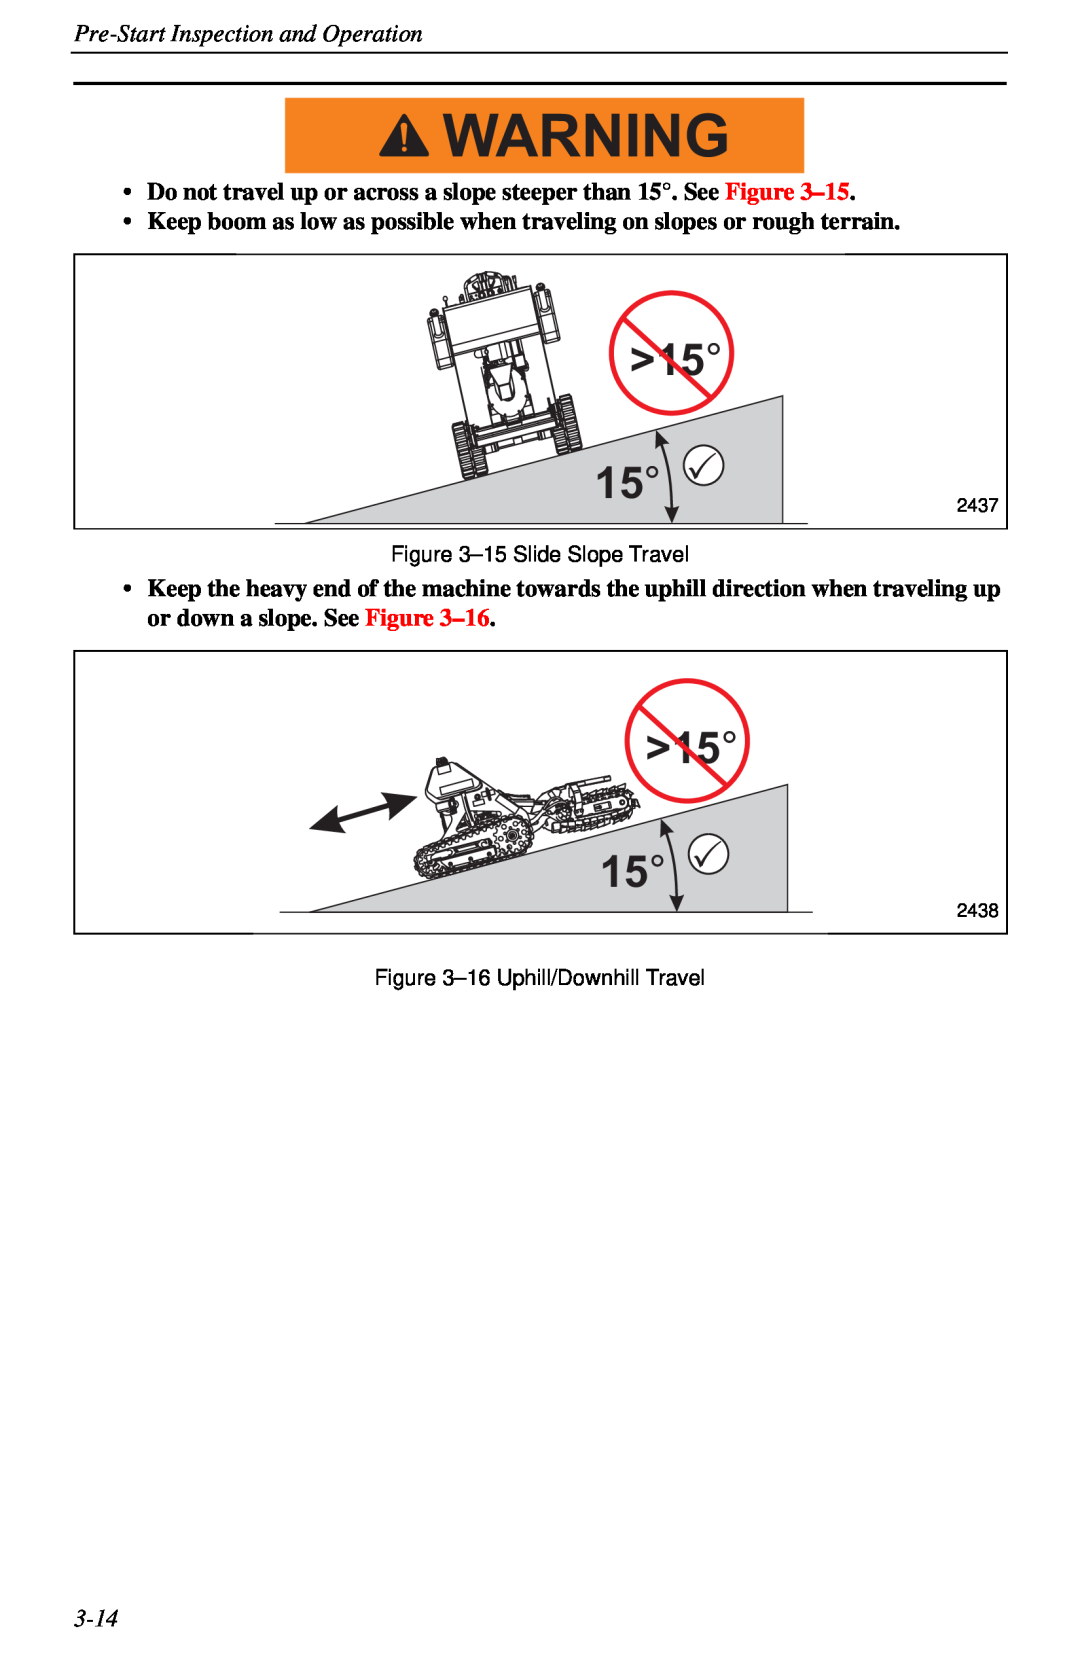 Cellboost 999-823 Pre-Start Inspection and Operation, Do not travel up or across a slope steeper than 15. See Figure, 3-14 